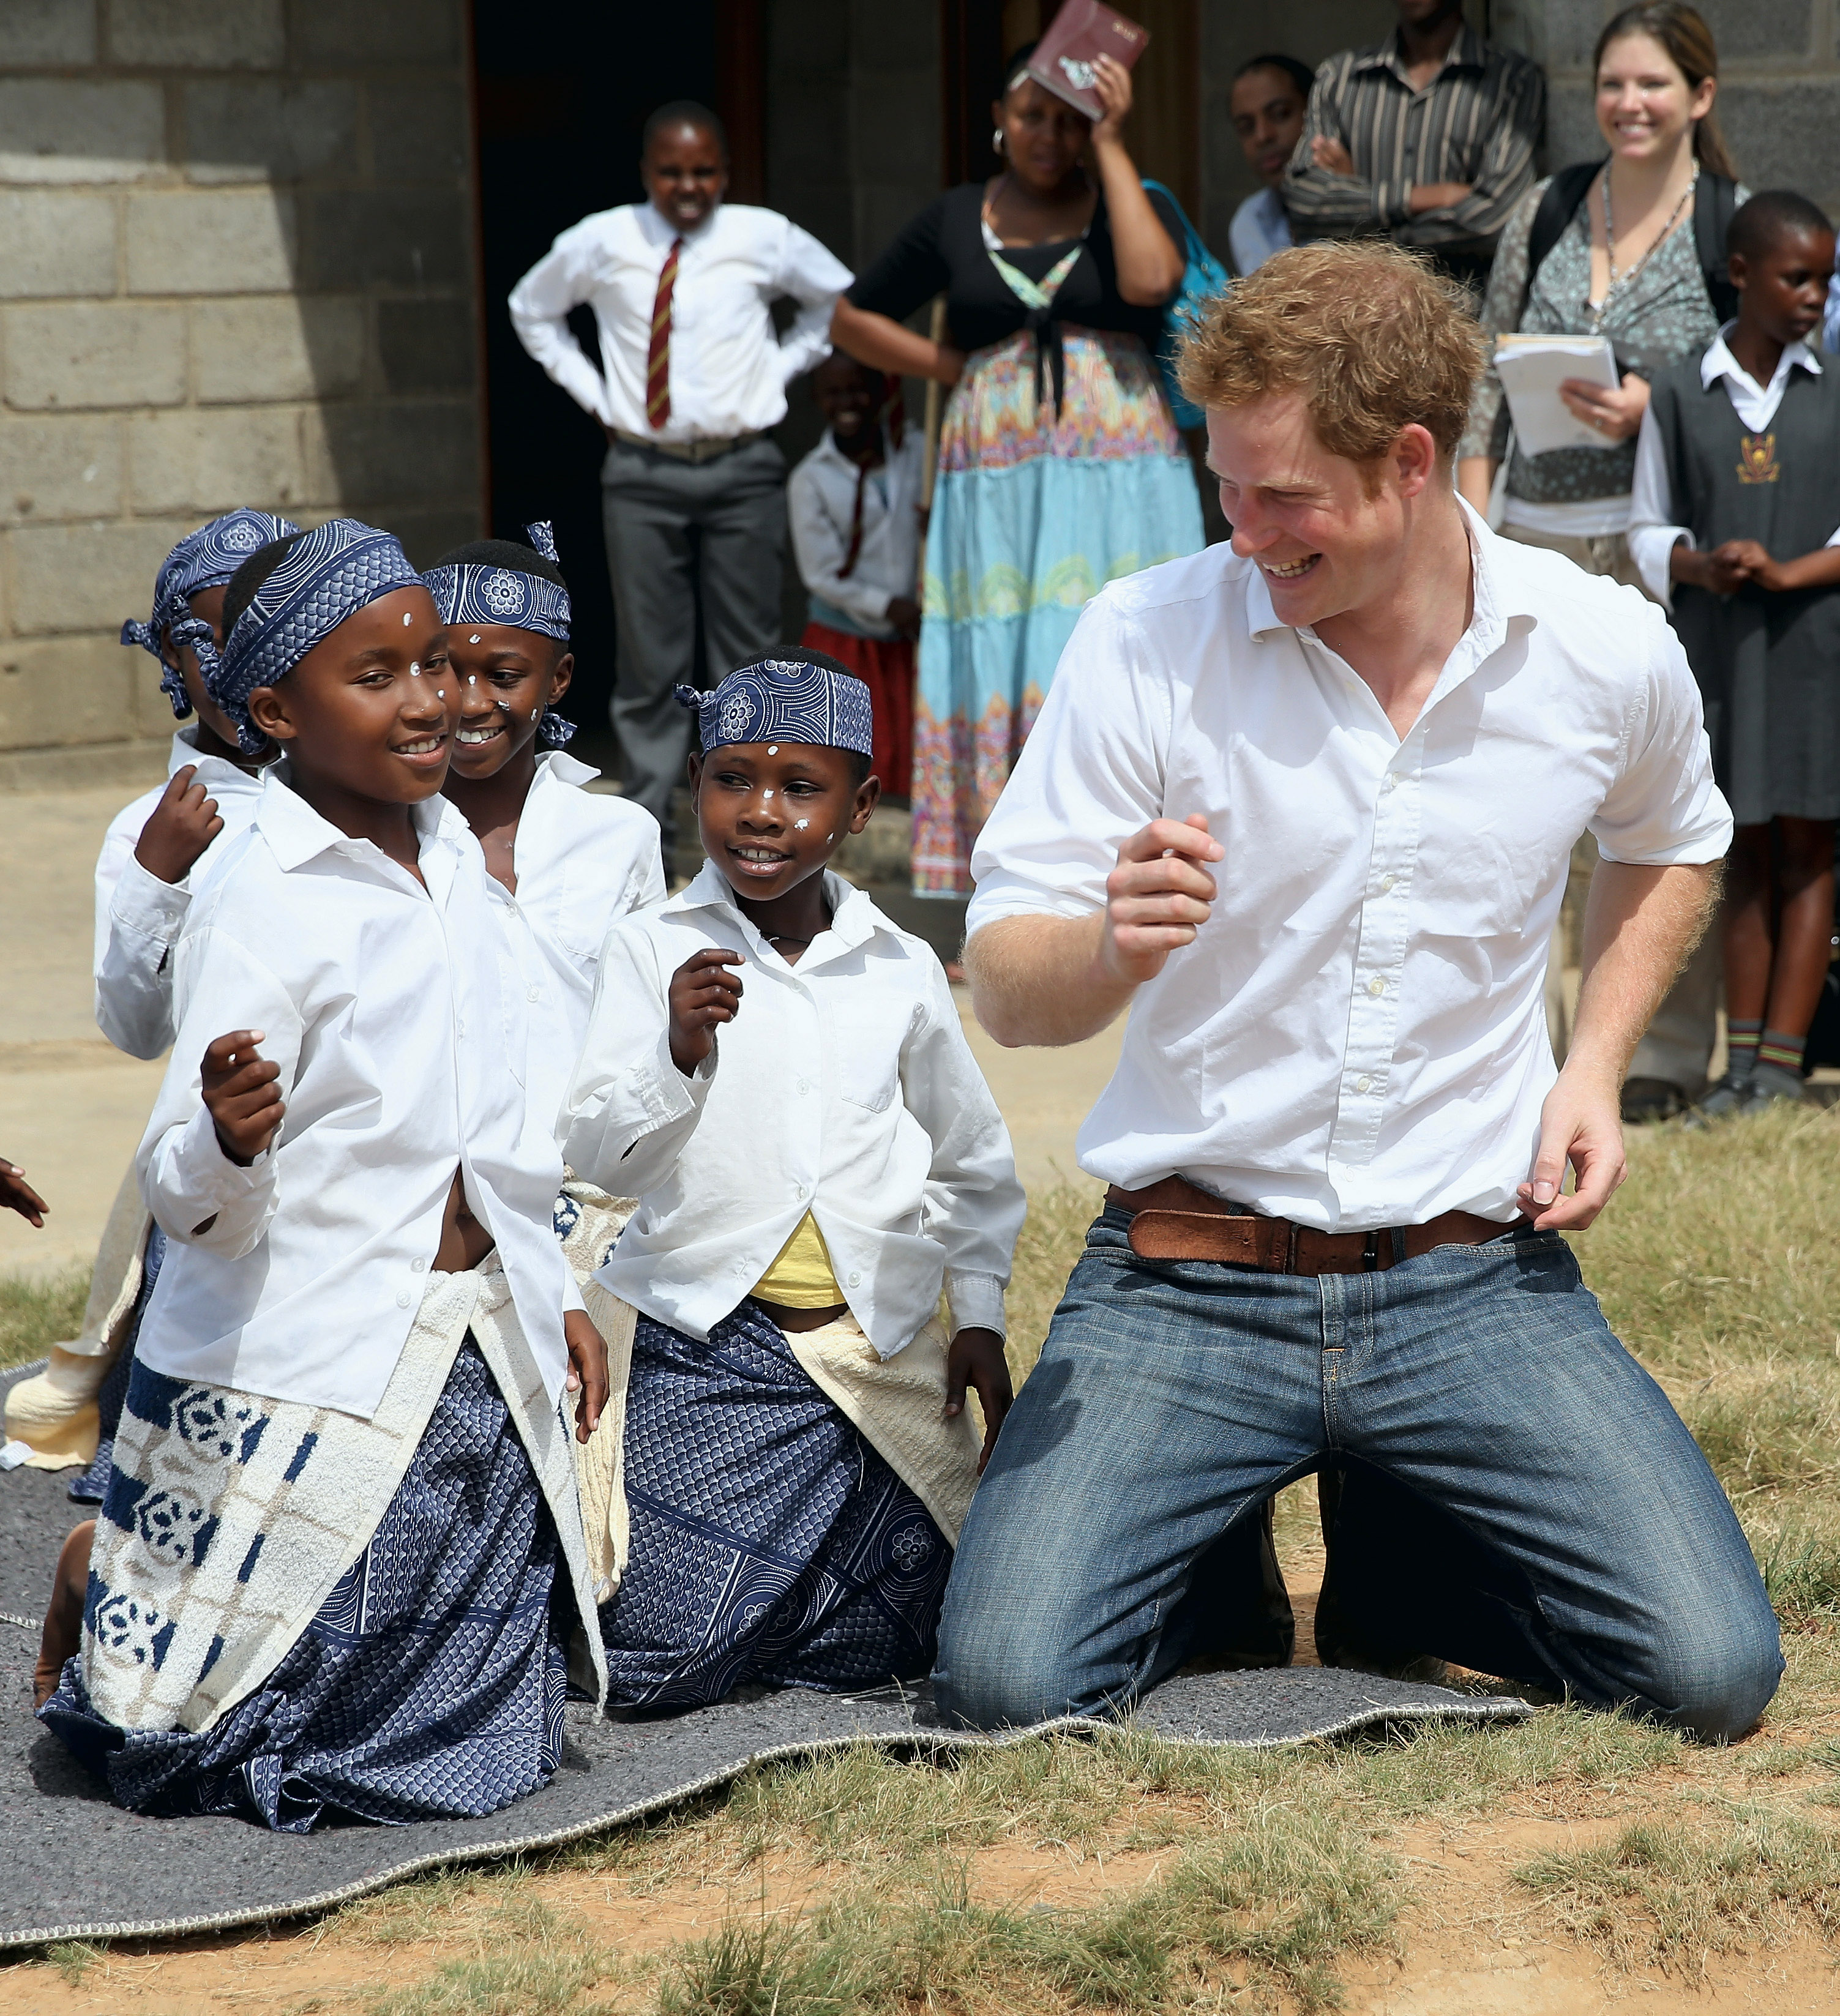 Prince Harry Secretly Visited Africa Over the Weekend